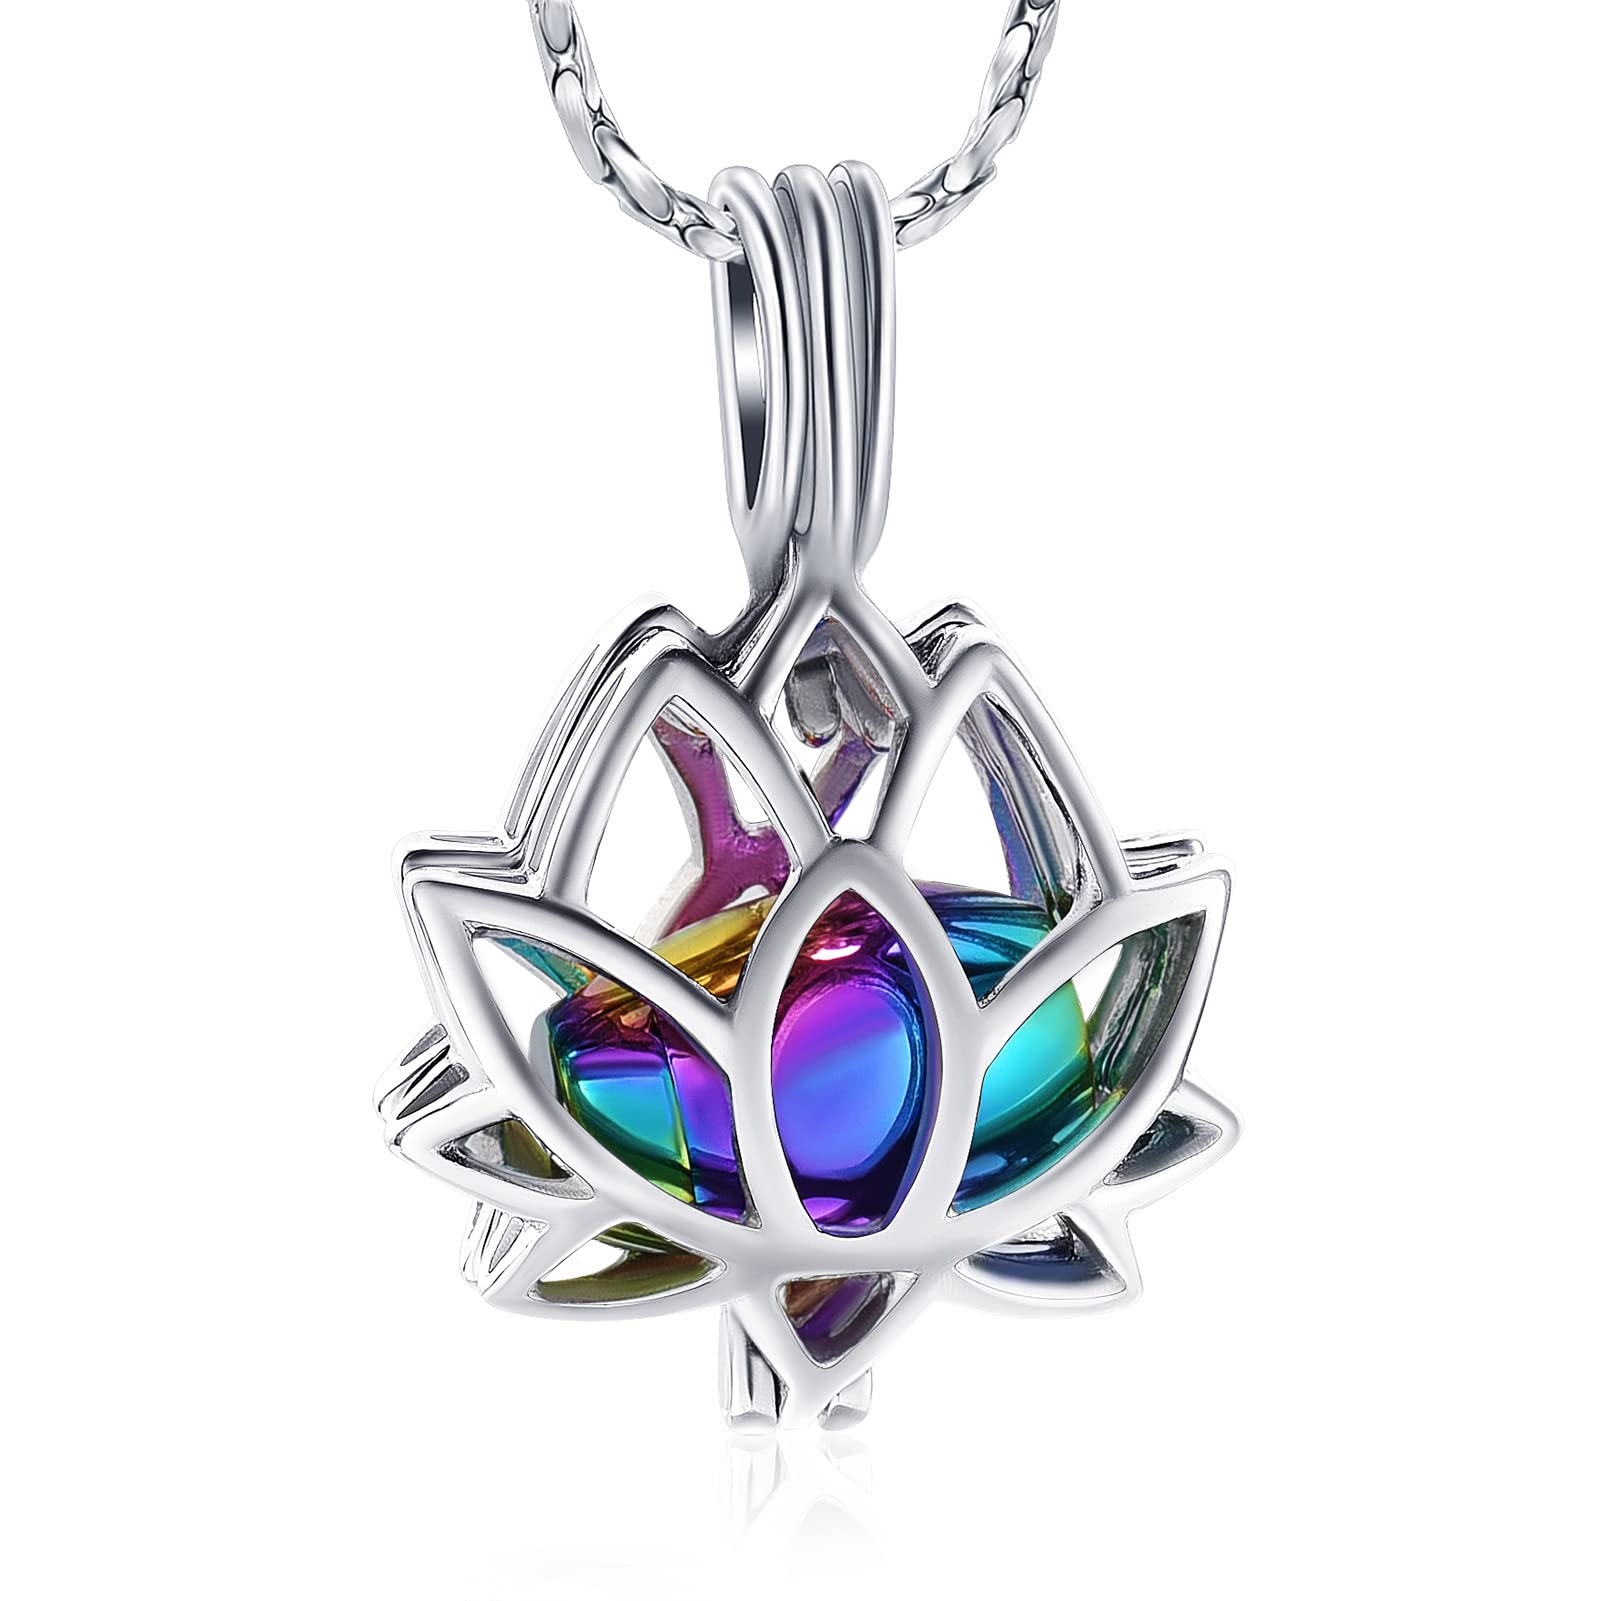 Imrsanl Cremation Jewelry for Ashes - Lotus Flower Ashes Pendant Necklace with Mini Keepsake Urn Memorial Ash Jewelry （Silver-Co